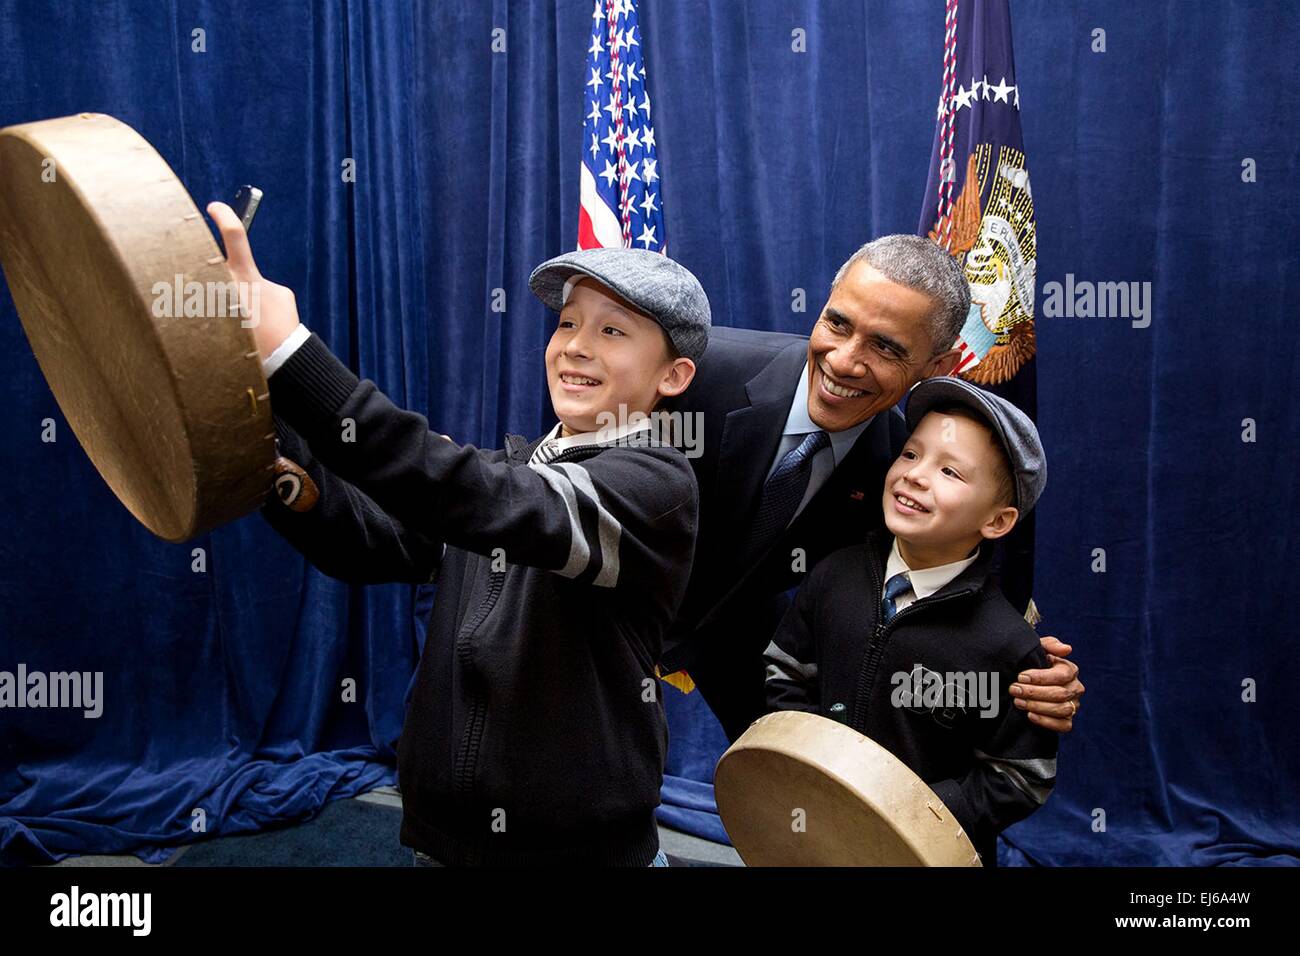 US President Barack Obama poses for a photo with children following his remarks at the White House Tribal Nations Conference December 3, 2014 in Washington, D.C. Stock Photo